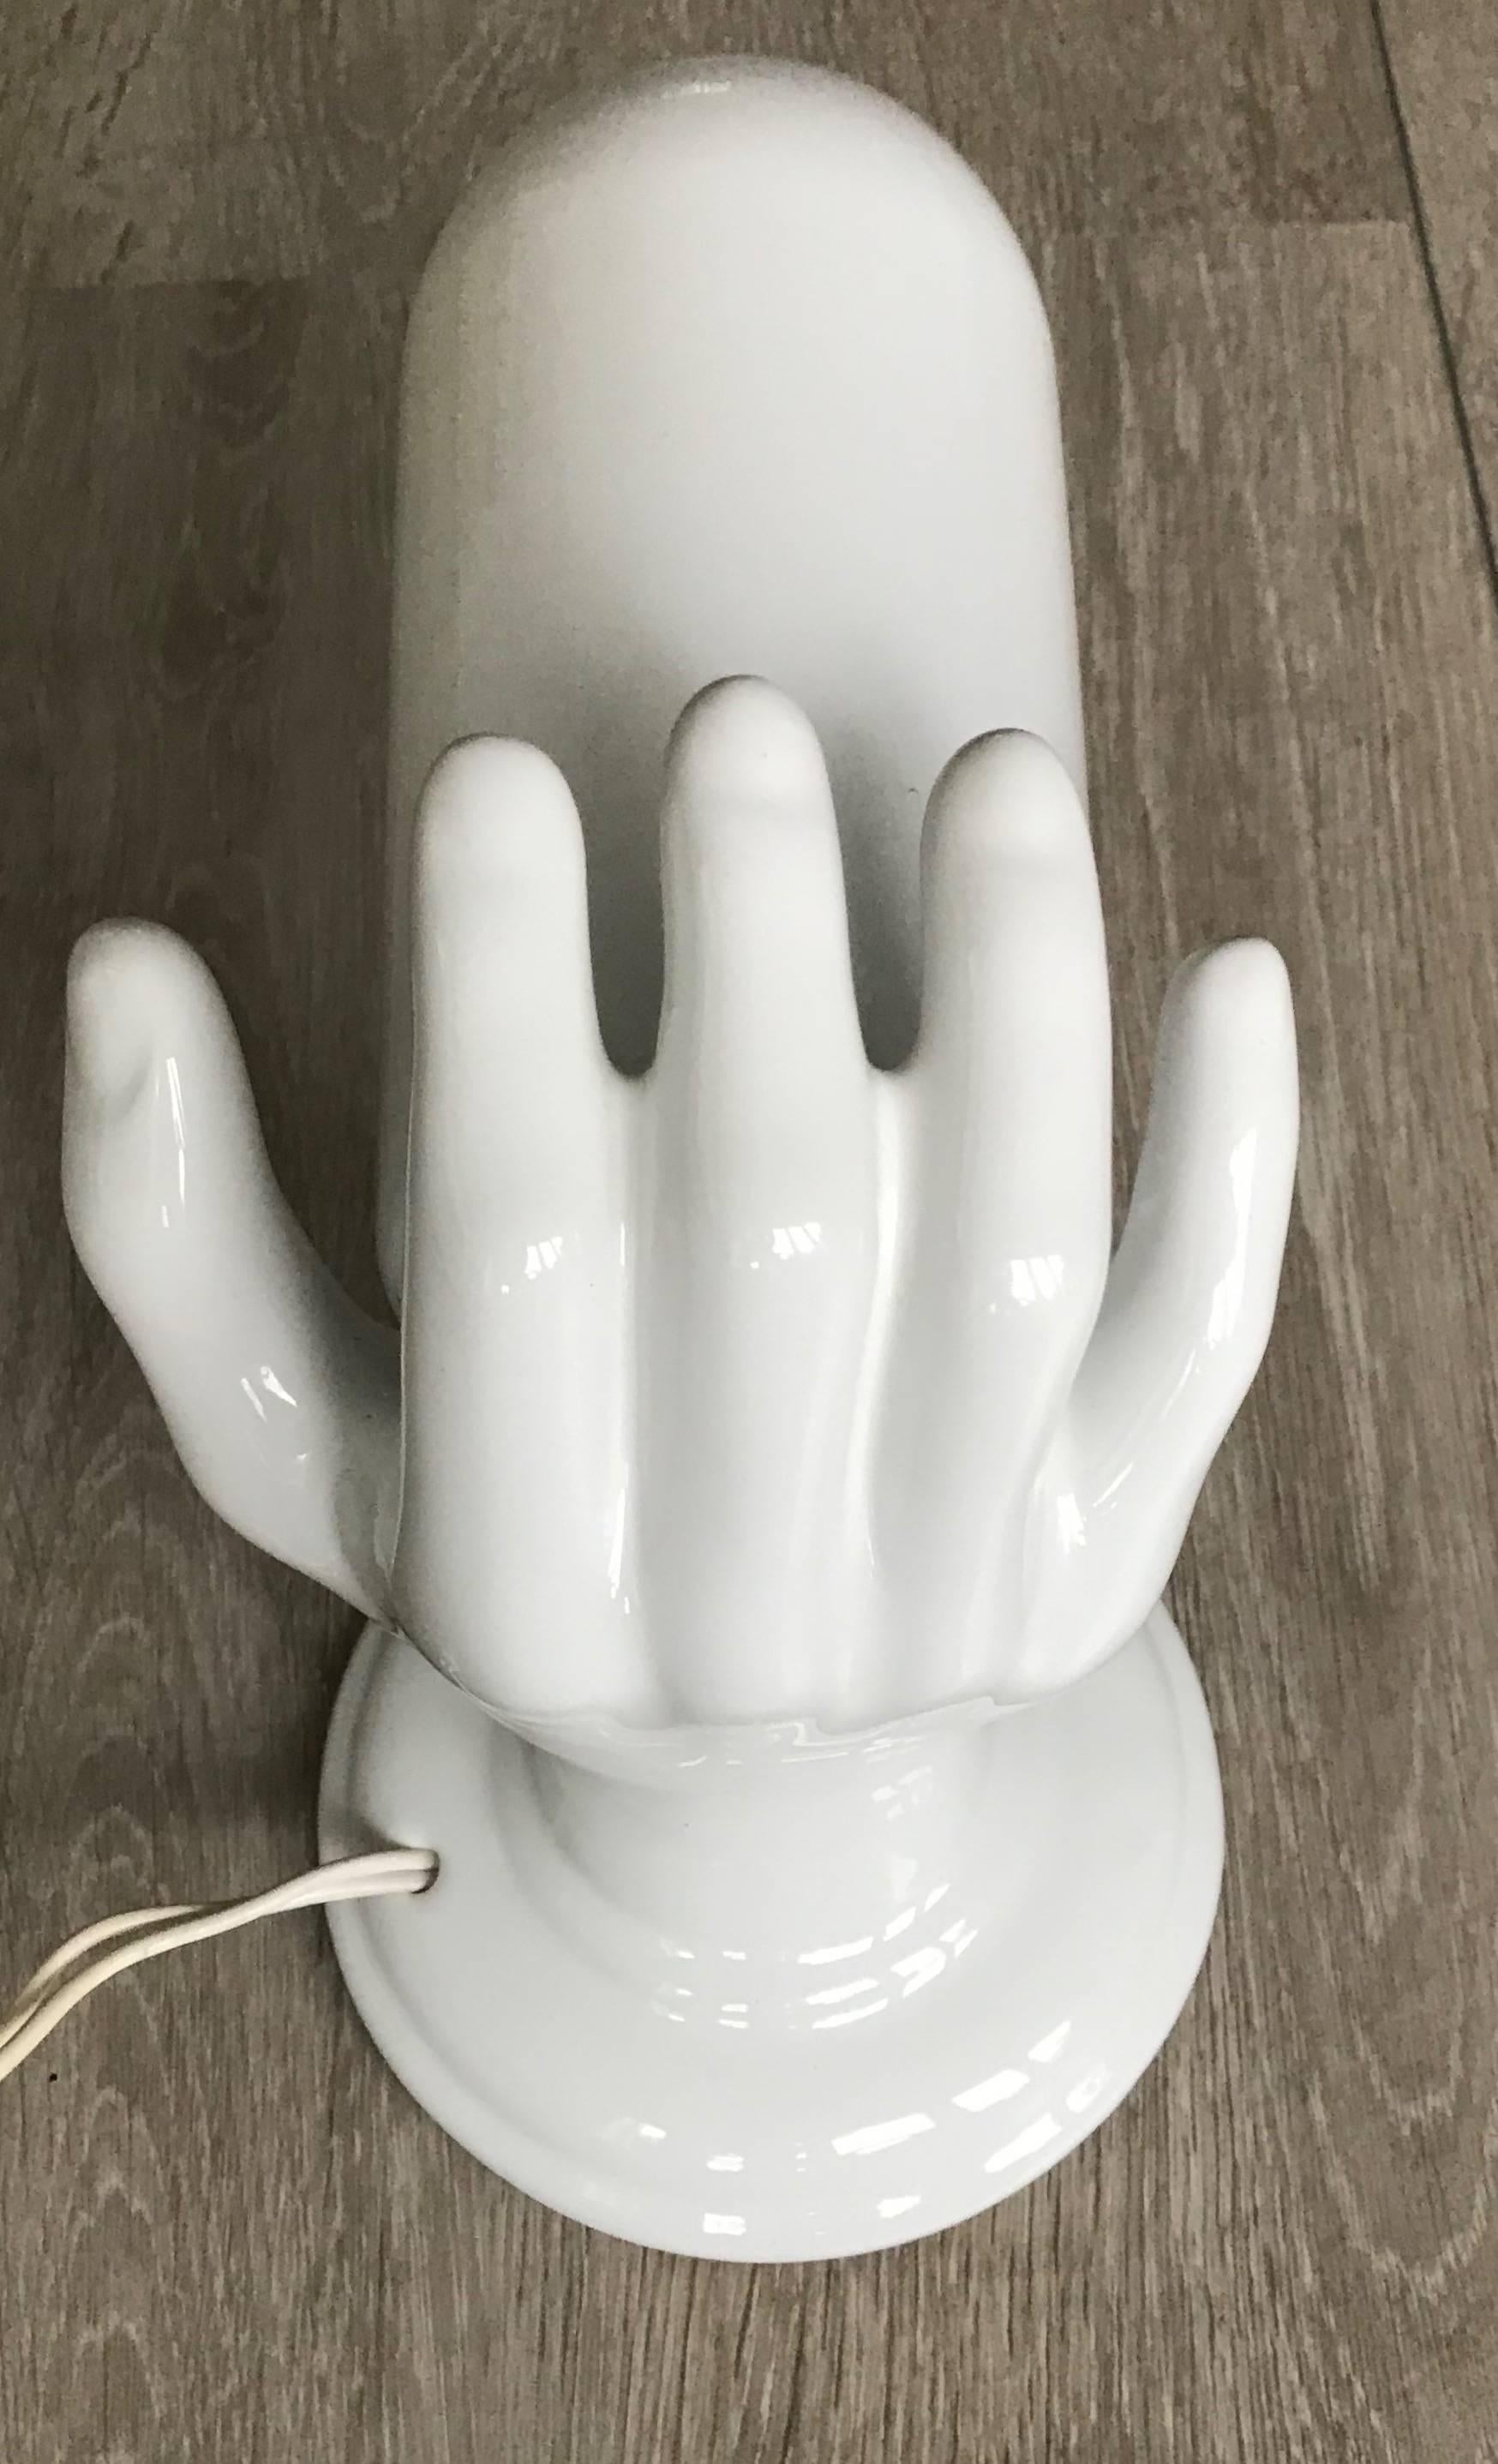 Mid-Century Modern 1970s Glazed White Ceramic Right Hand Holding a Glass Wall Sconce or Wall Light